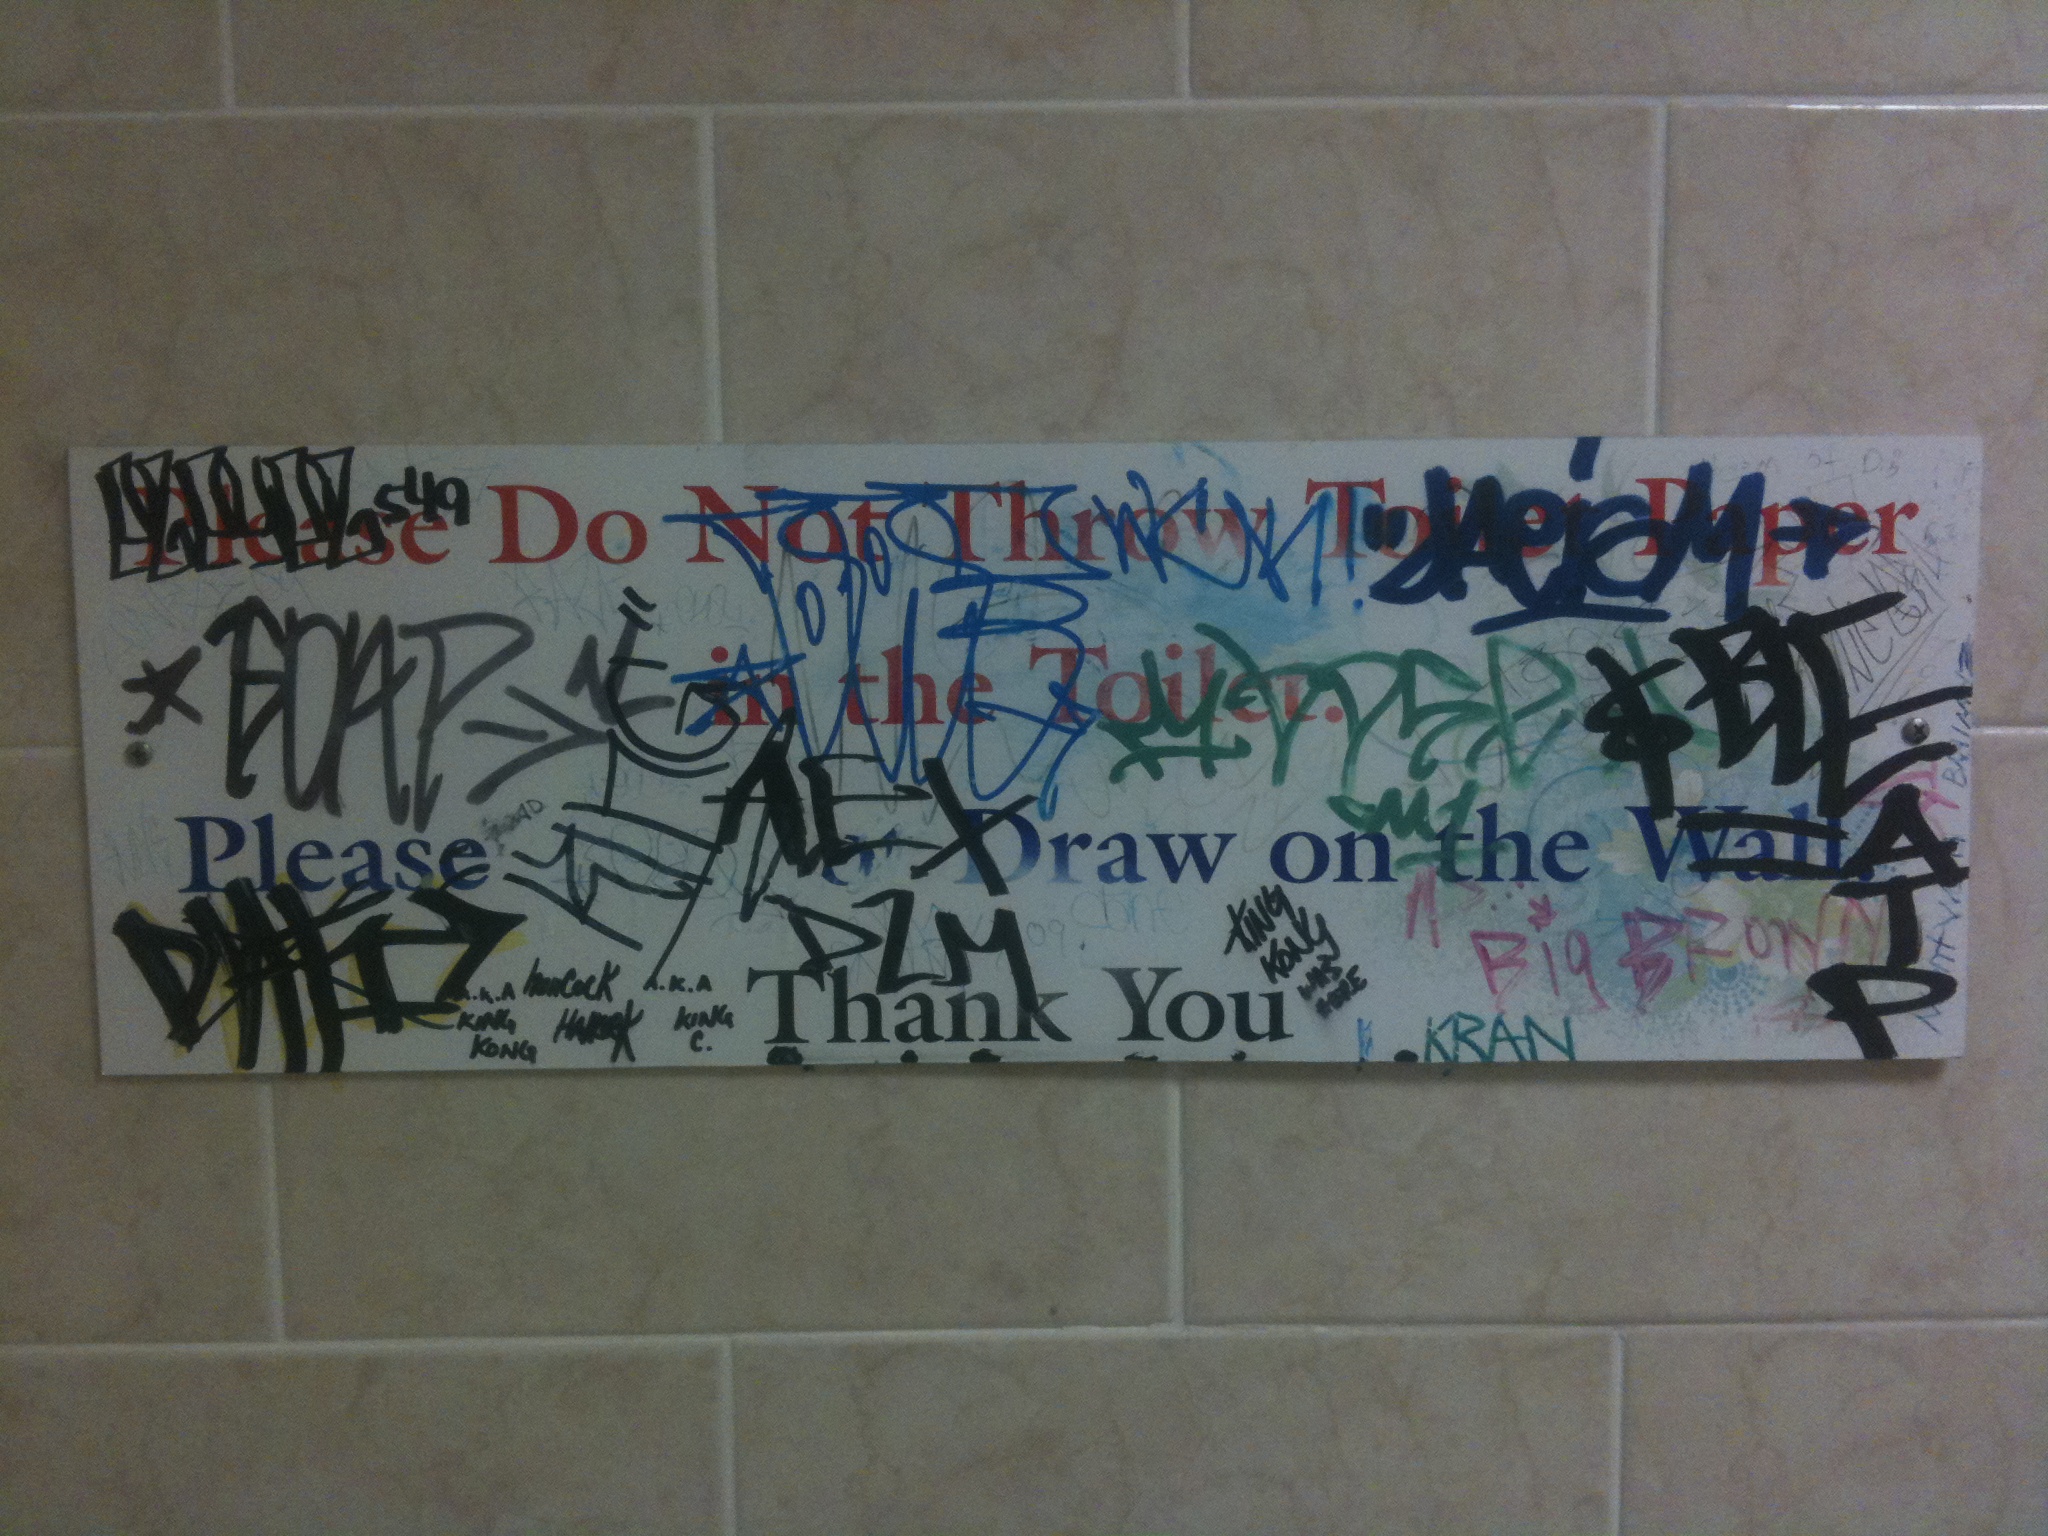 Bathroom wall of a haircut place in Philly. Technically they obeyed the sign. 